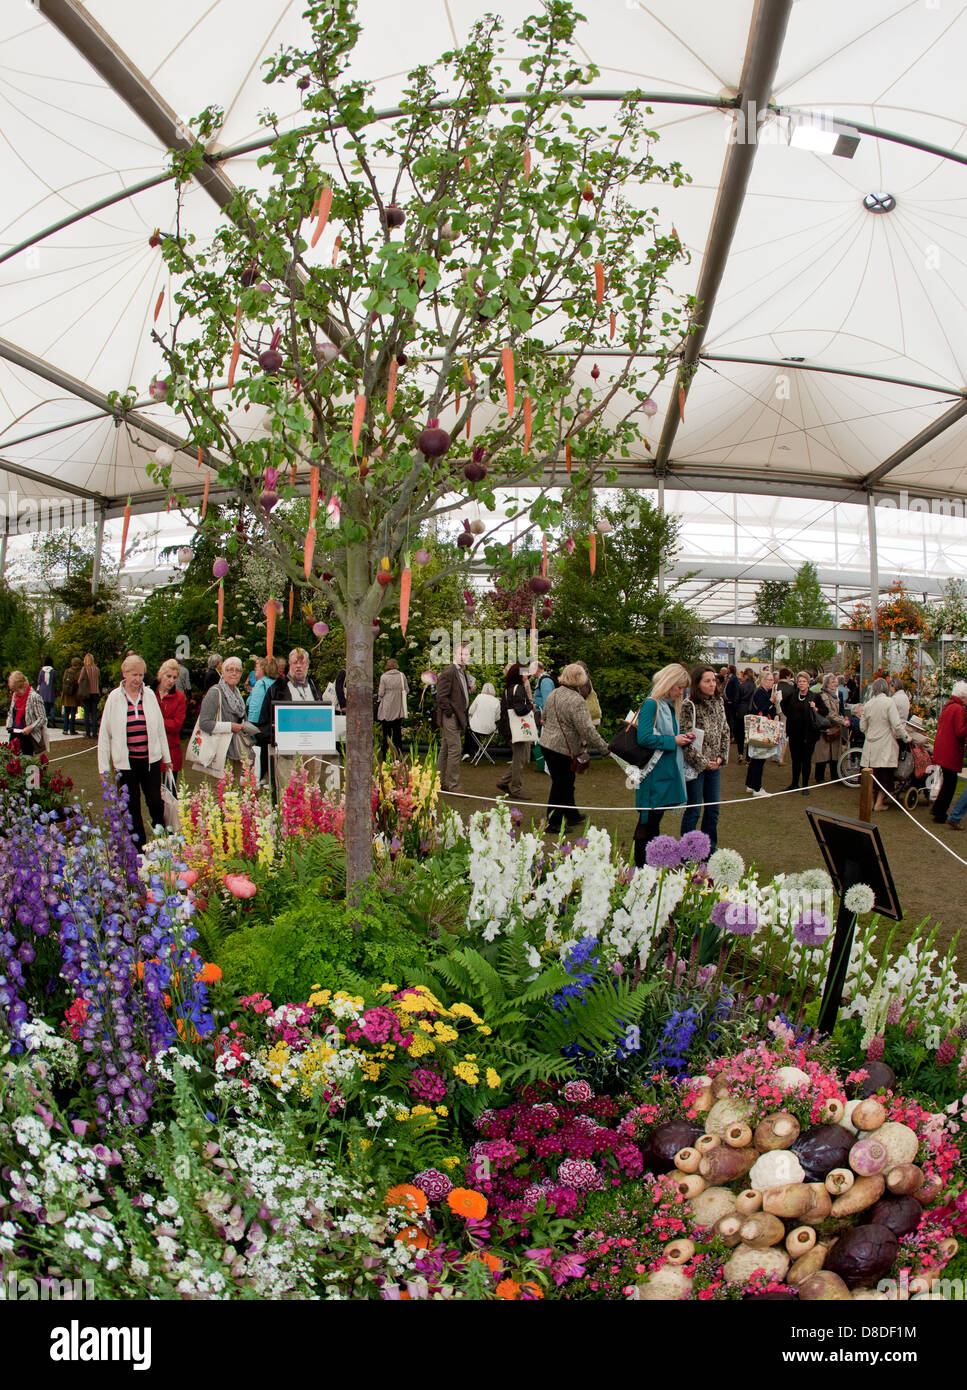 People Inside the Floral Pavilion At The Chelsea Flower Show London UK Stock Photo